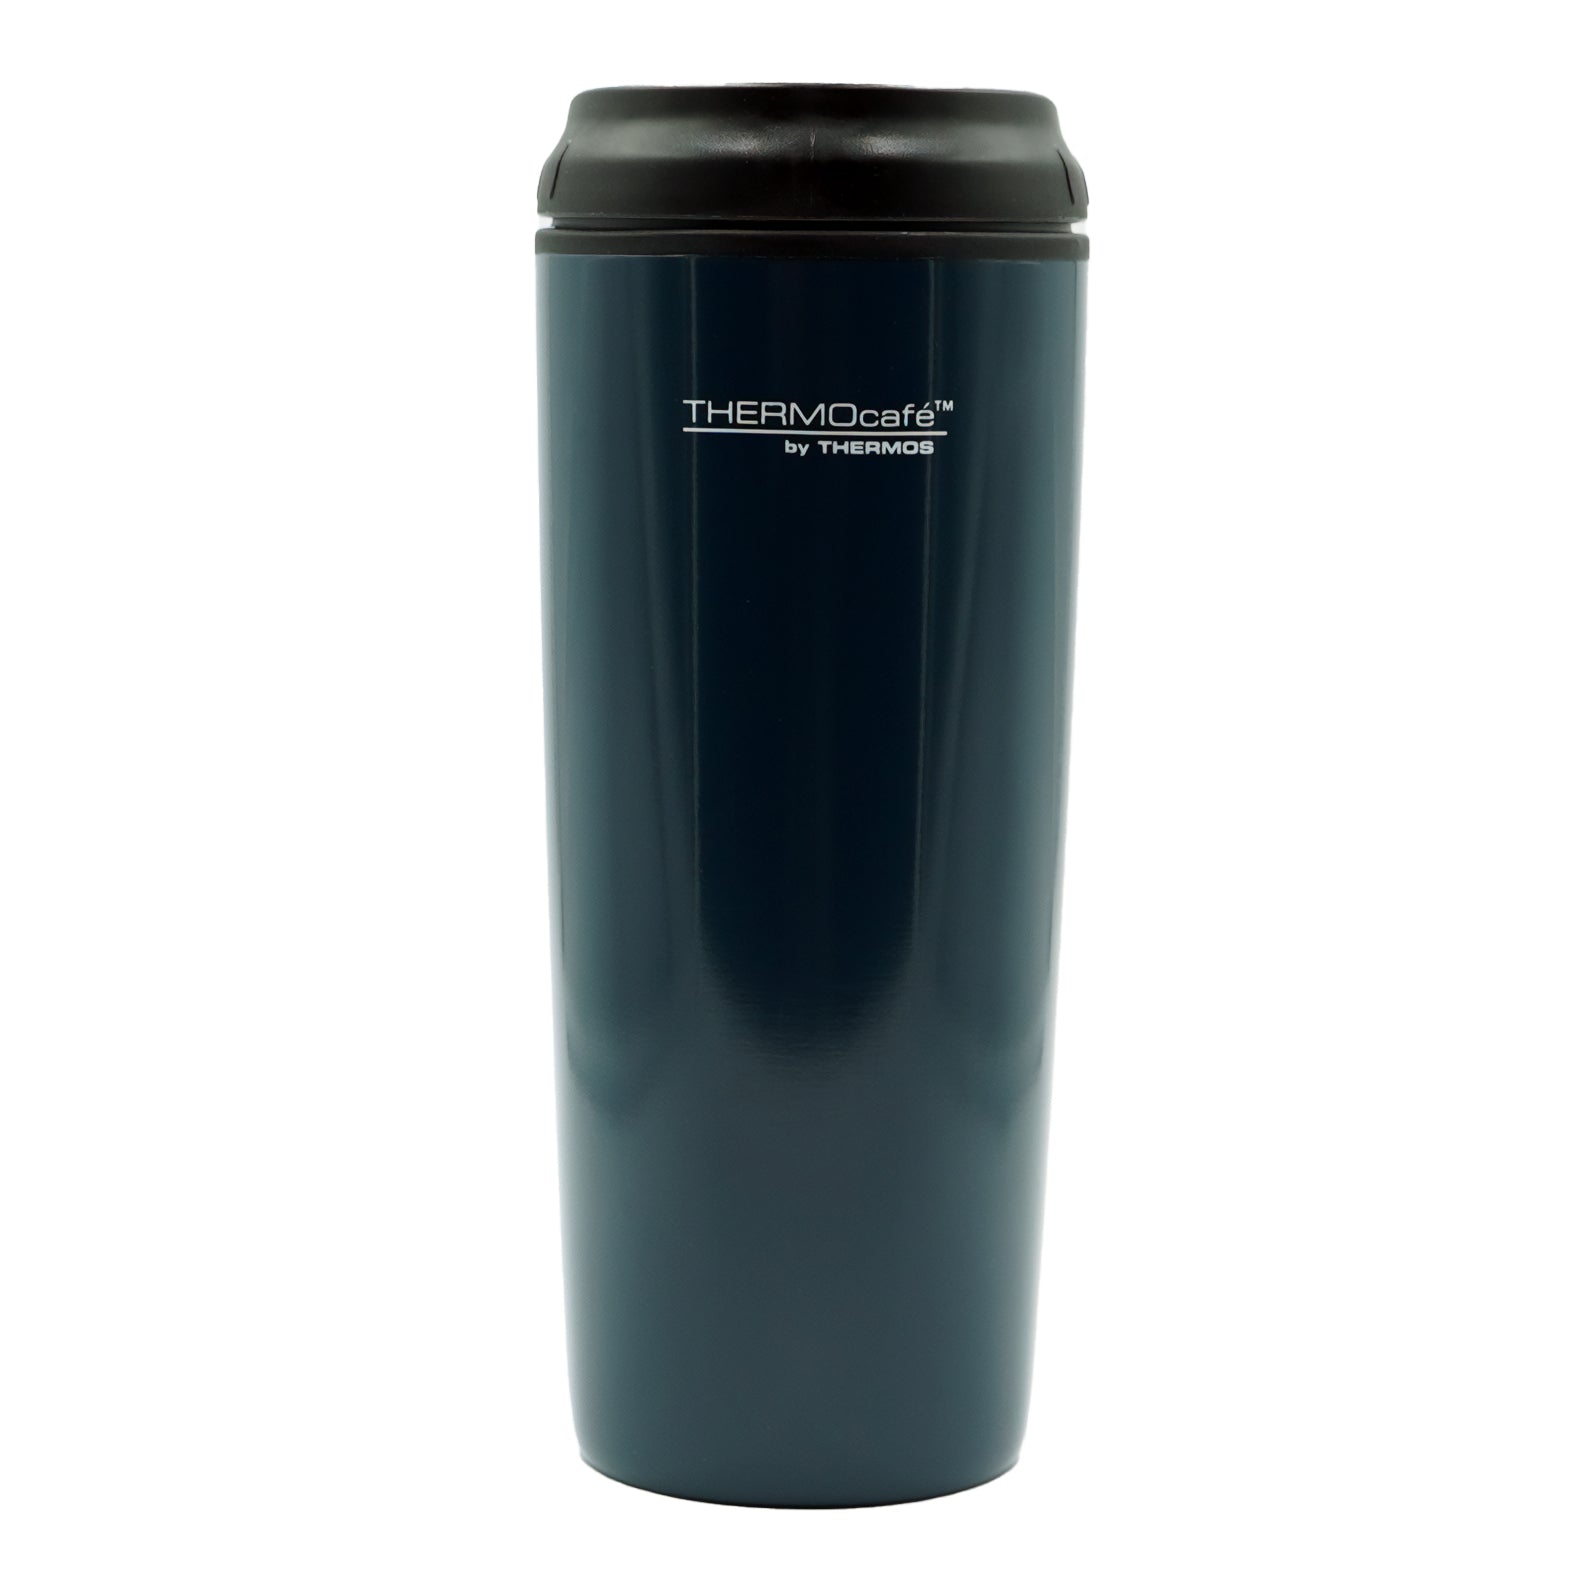 Thermos 16 oz. Vacuum Insulated Stainless Steel Tumbler - Charcoal/Navy Thermos